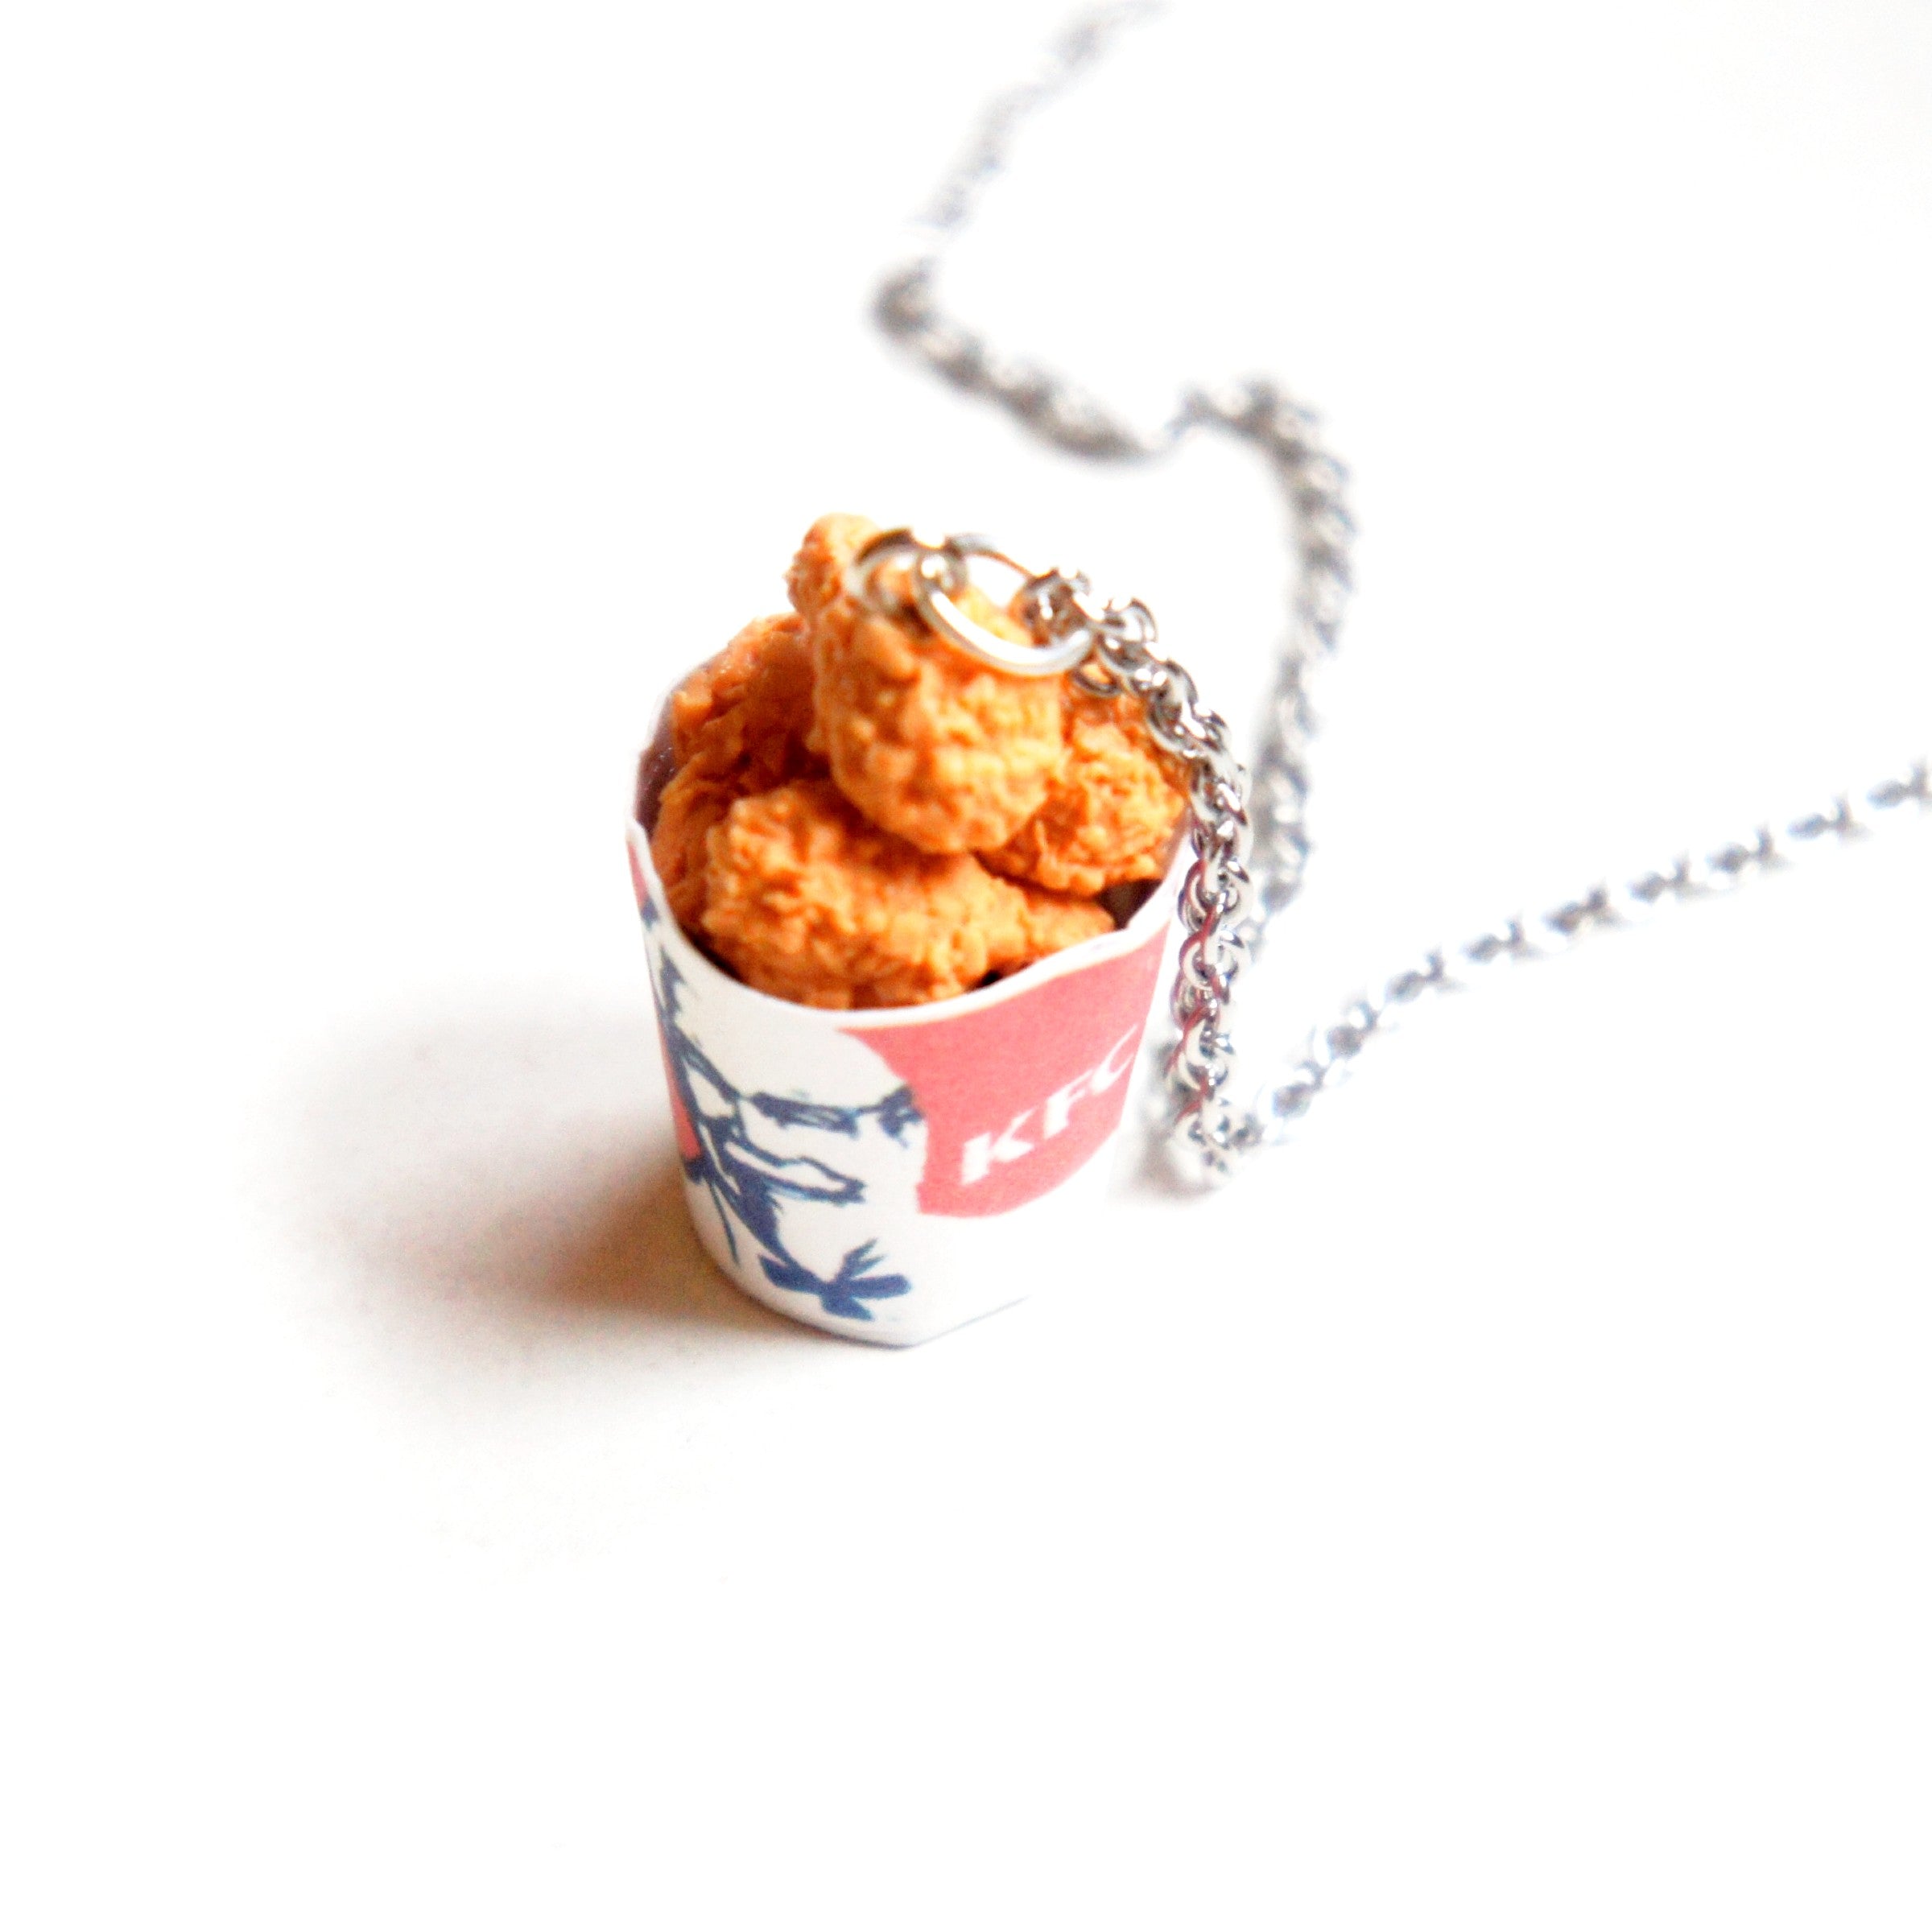 Fried Chicken Bucket Necklace - Jillicious charms and accessories